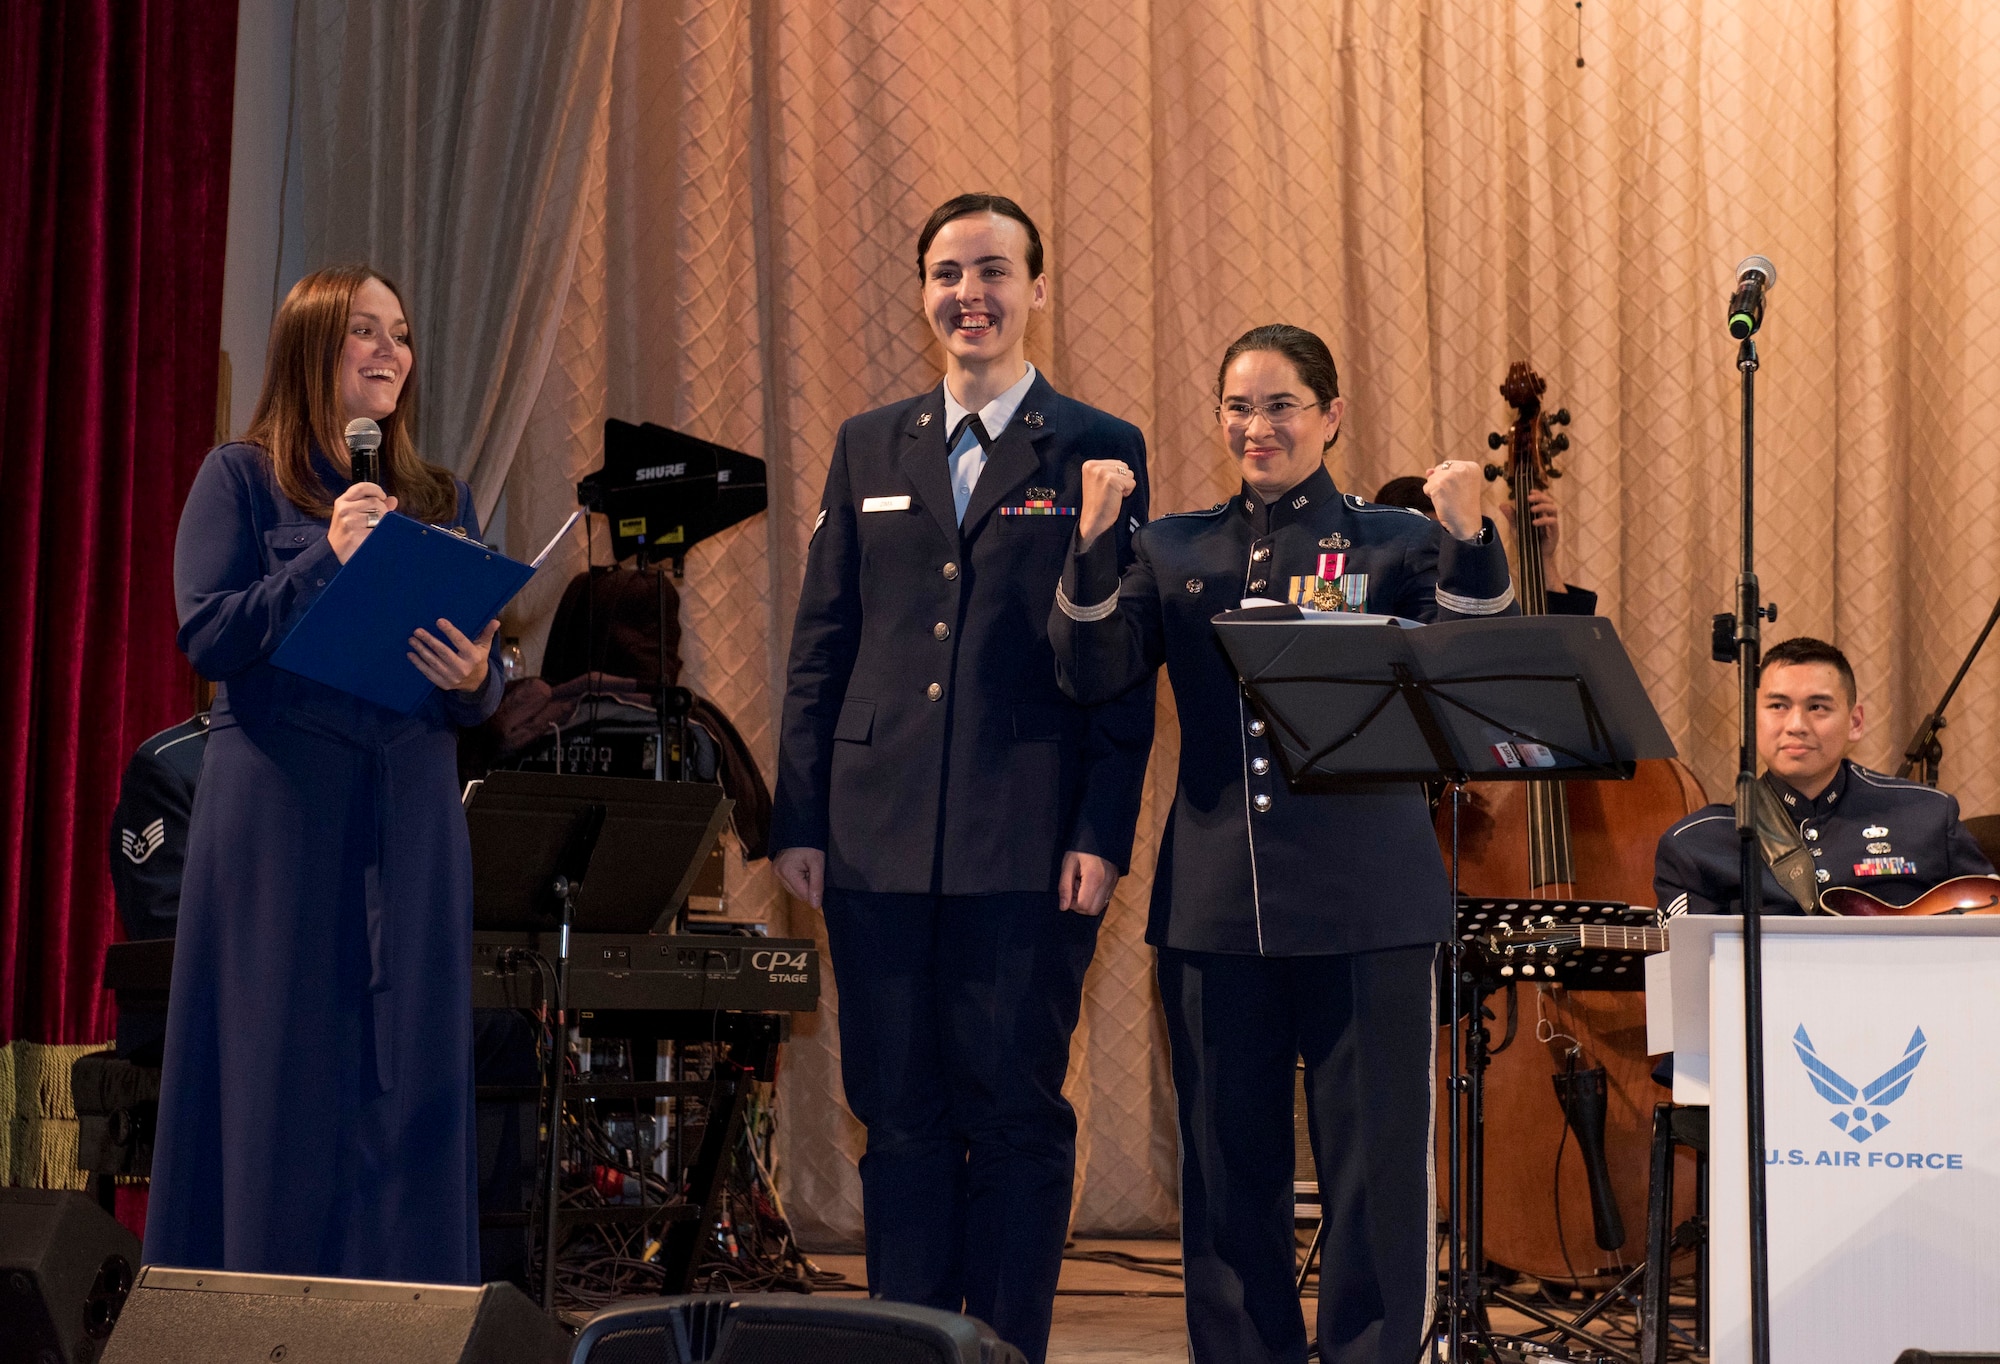 Airman 1st Class Jennifer Zima, 501st Combat Support Wing Public Affairs photojournalist, is introduced on stage by Maria Lebovka, media manager and interpreter for the U.S. Air Forces in Europe Ambassadors Jazz Band’s Ukraine tour, and Lt. Col Cristina Moore Urrutia, USAFE Band commander and conductor, during a concert with the USAFE Band and the Ukrainian National Presidential Orchestra at the Philharmonic in Chernivisti, Ukraine, Oct. 12, 2019. The USAFE Band traveled to six cities in central and western Ukraine October 6-20, 2019 to conduct the “Music of Freedom” tour, which celebrated the shared spirit of freedom and enduring partnership between U.S. and Ukrainian armed forces. Zima is originlly from Ukraine and returned for the first time since her childhood as the photojournalist for the band’s Ukraine tour. (U.S. Air Force photo by 1st Lt. Sarah Johnson)